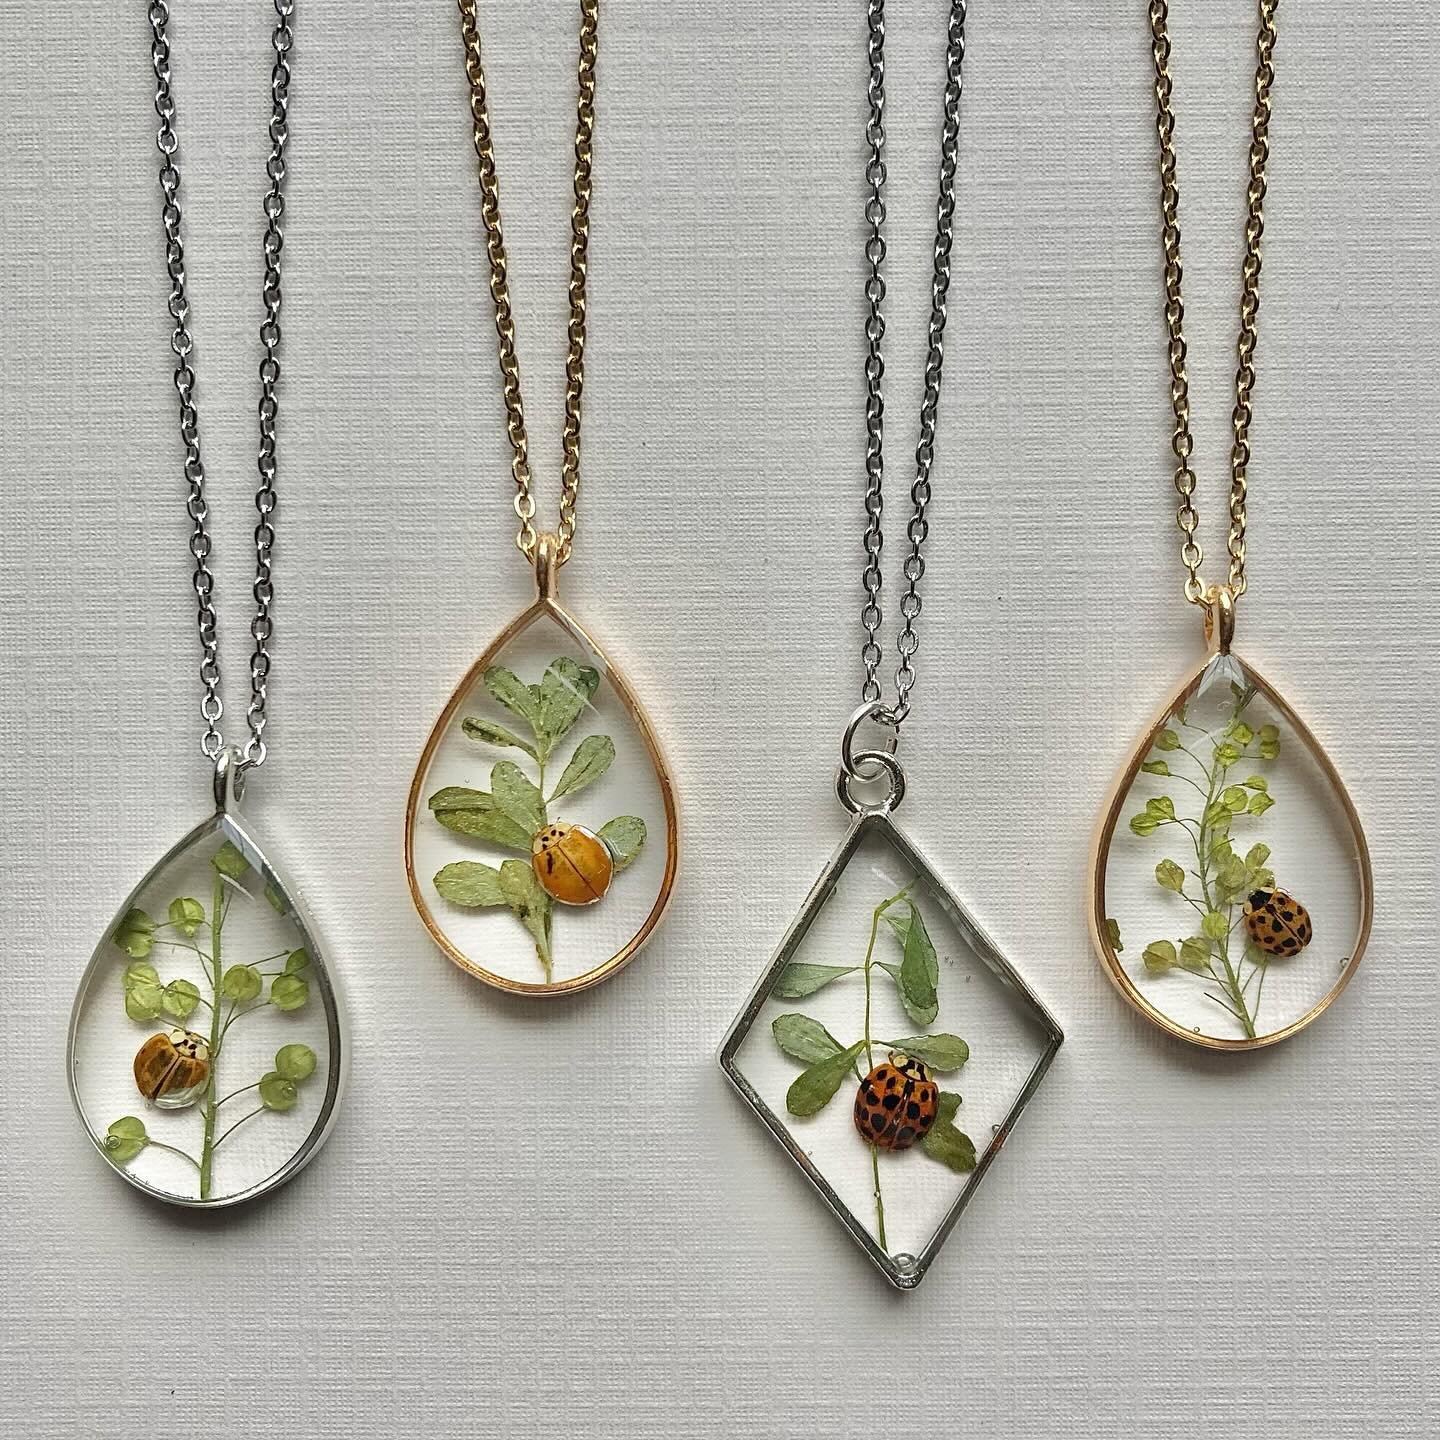 Leaf &amp; ladybug or Asian lady beetle necklaces 🌿🐞

*no bugs harmed 

🐝 Take a piece of the Berkshires with you 🐝 

.
.
.
.
.
.
.

 #entomology #insectart #insect #insects  #jewelryshop #insectjewelry #necklace #necklaces #entomologyart #m#bugj